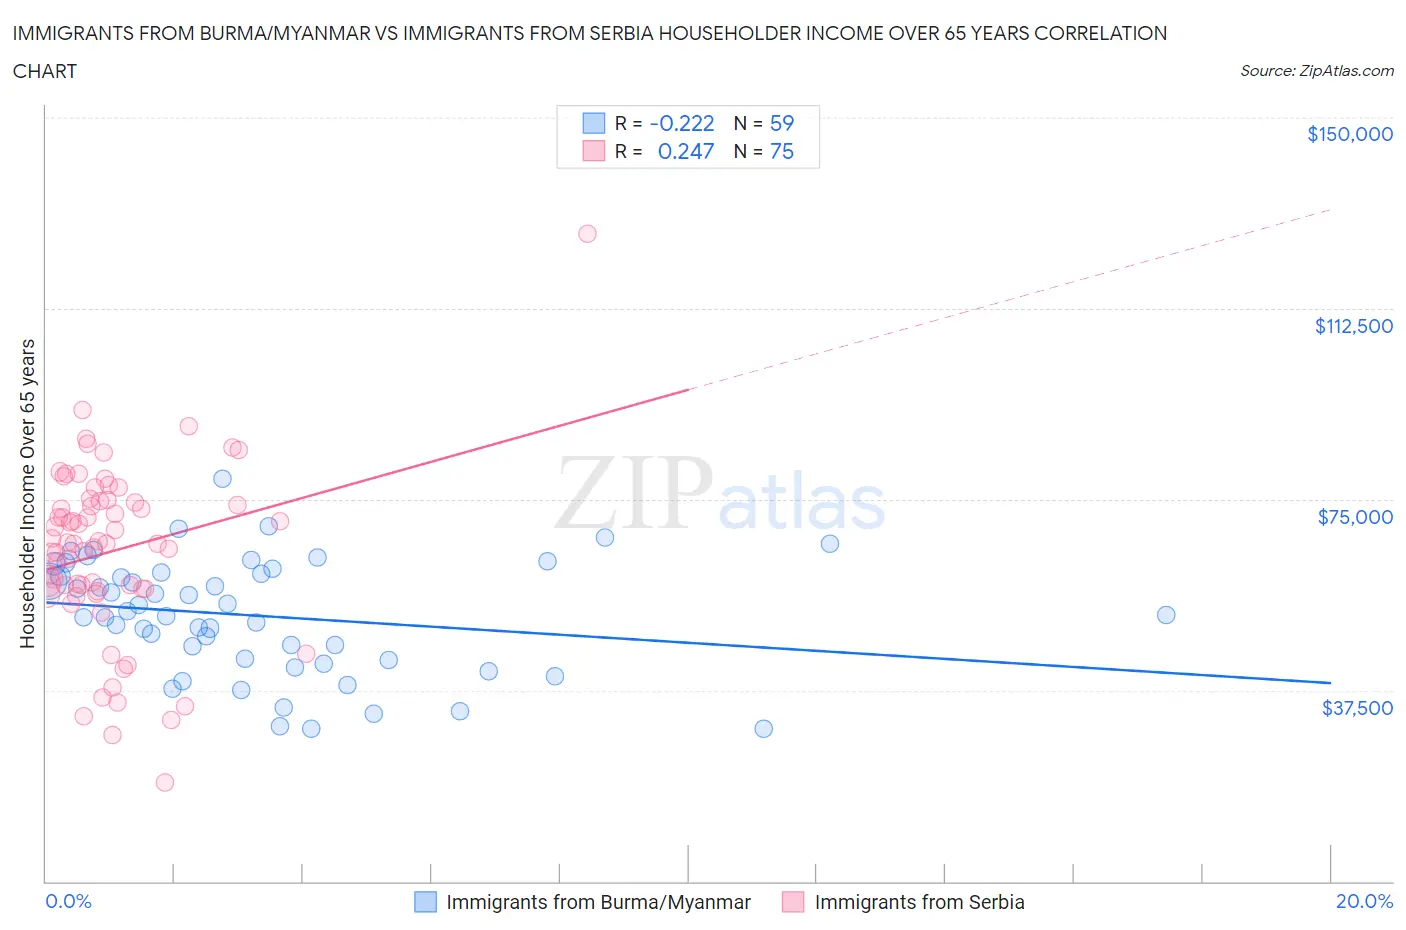 Immigrants from Burma/Myanmar vs Immigrants from Serbia Householder Income Over 65 years